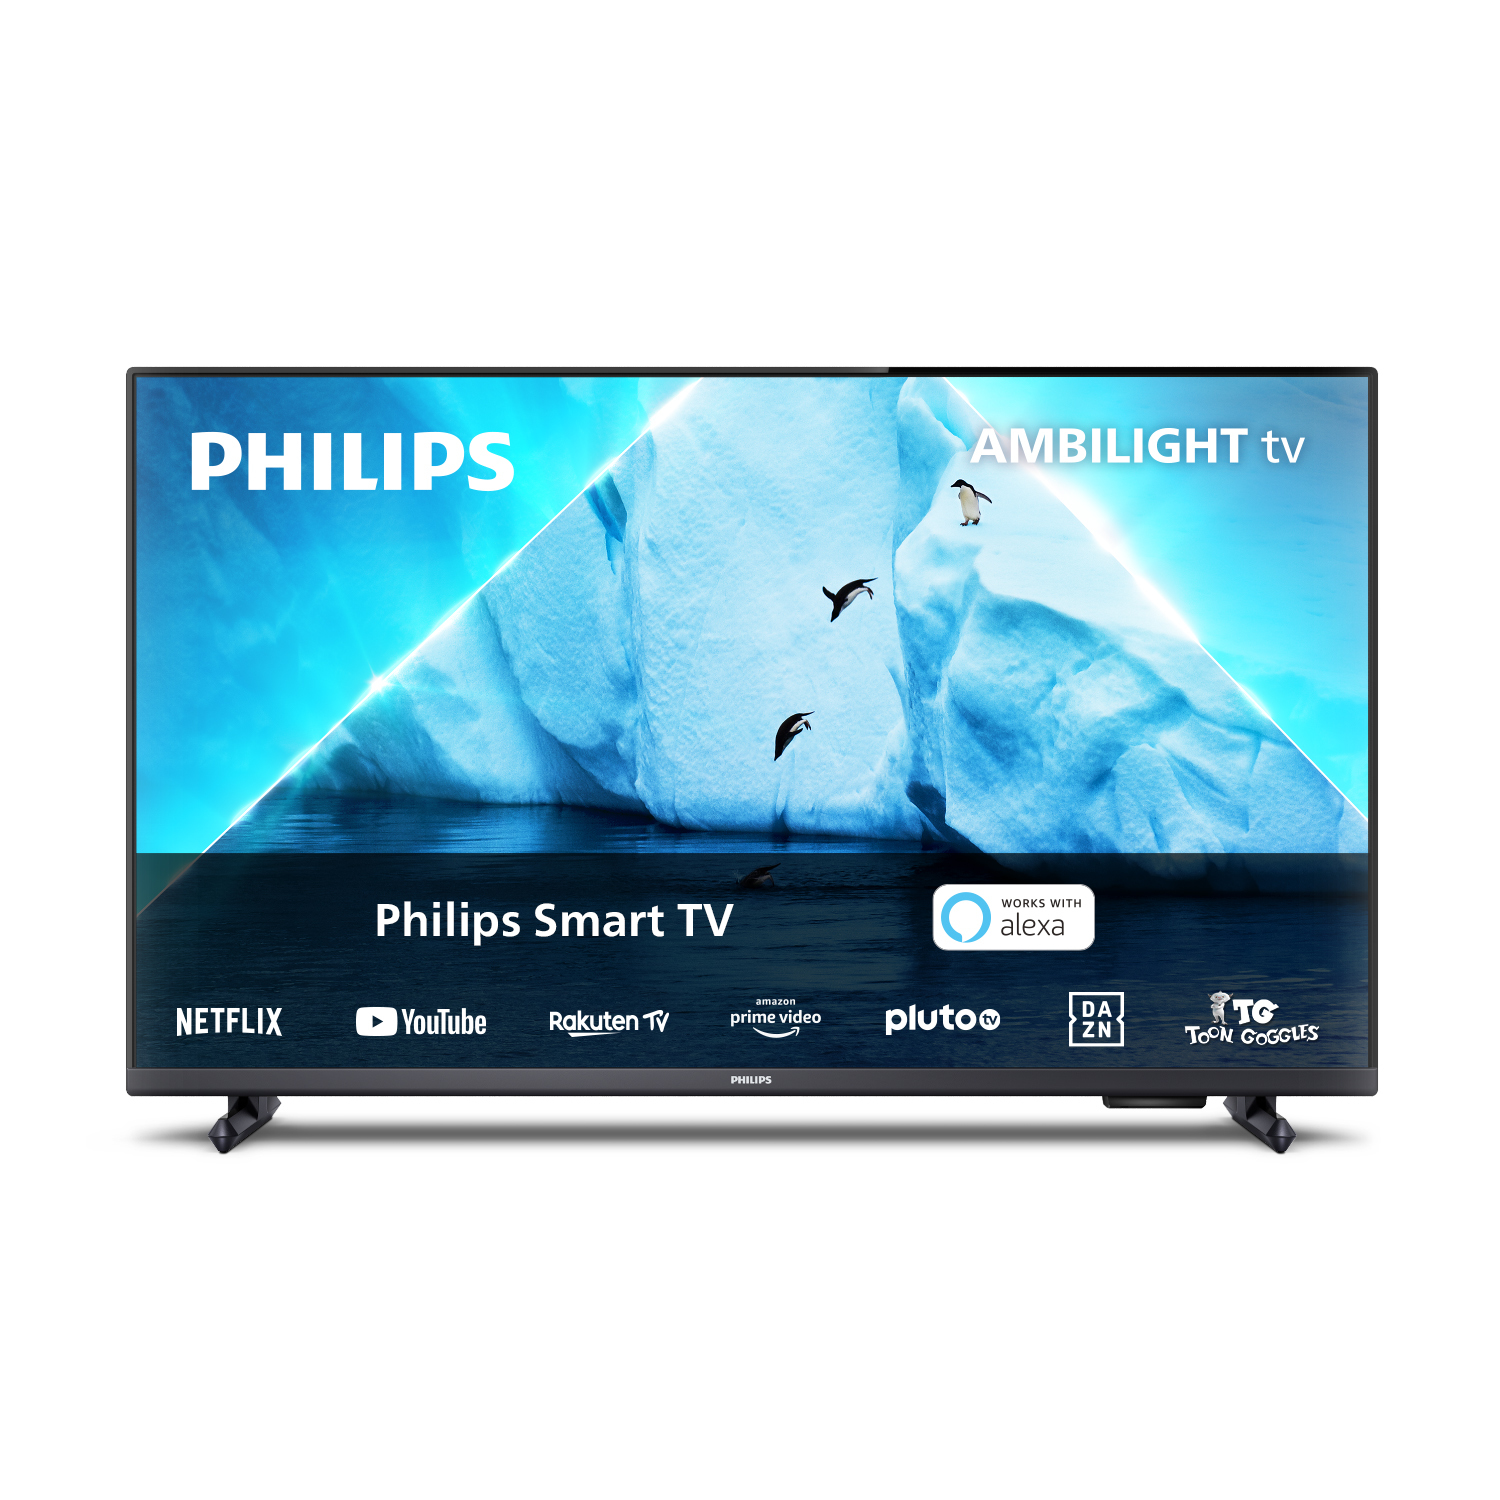 Philips 32PFS6908 - 32" Diagonal Class 6900 Series LED-backlit LCD TV - Smart TV - 1080p 1920 X 1080 - HDR - Anthracite Grey 32PFS6908/05 - C2000